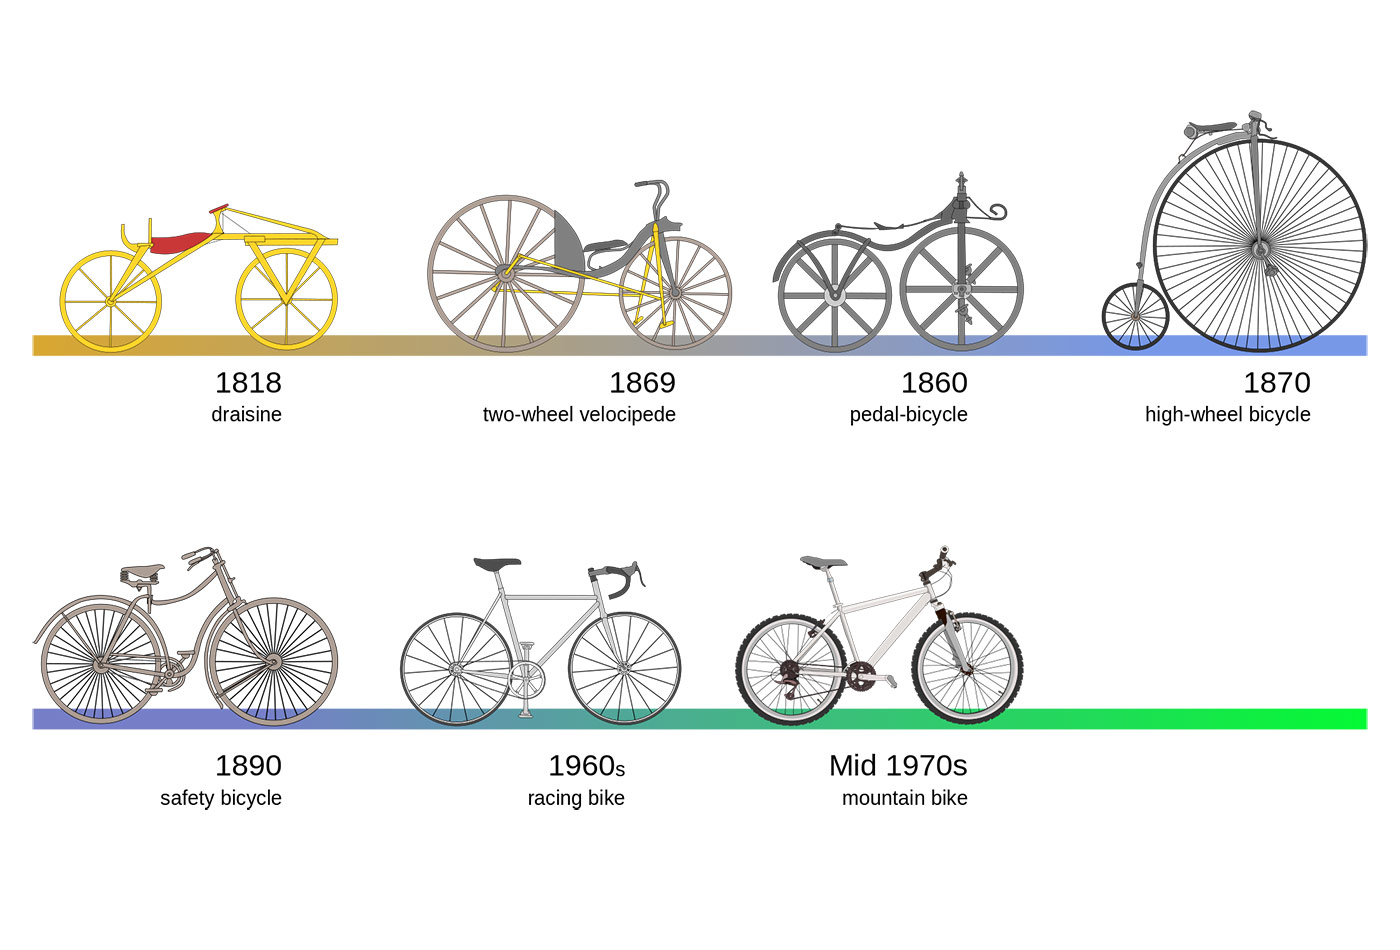 Evolution of the bicycle